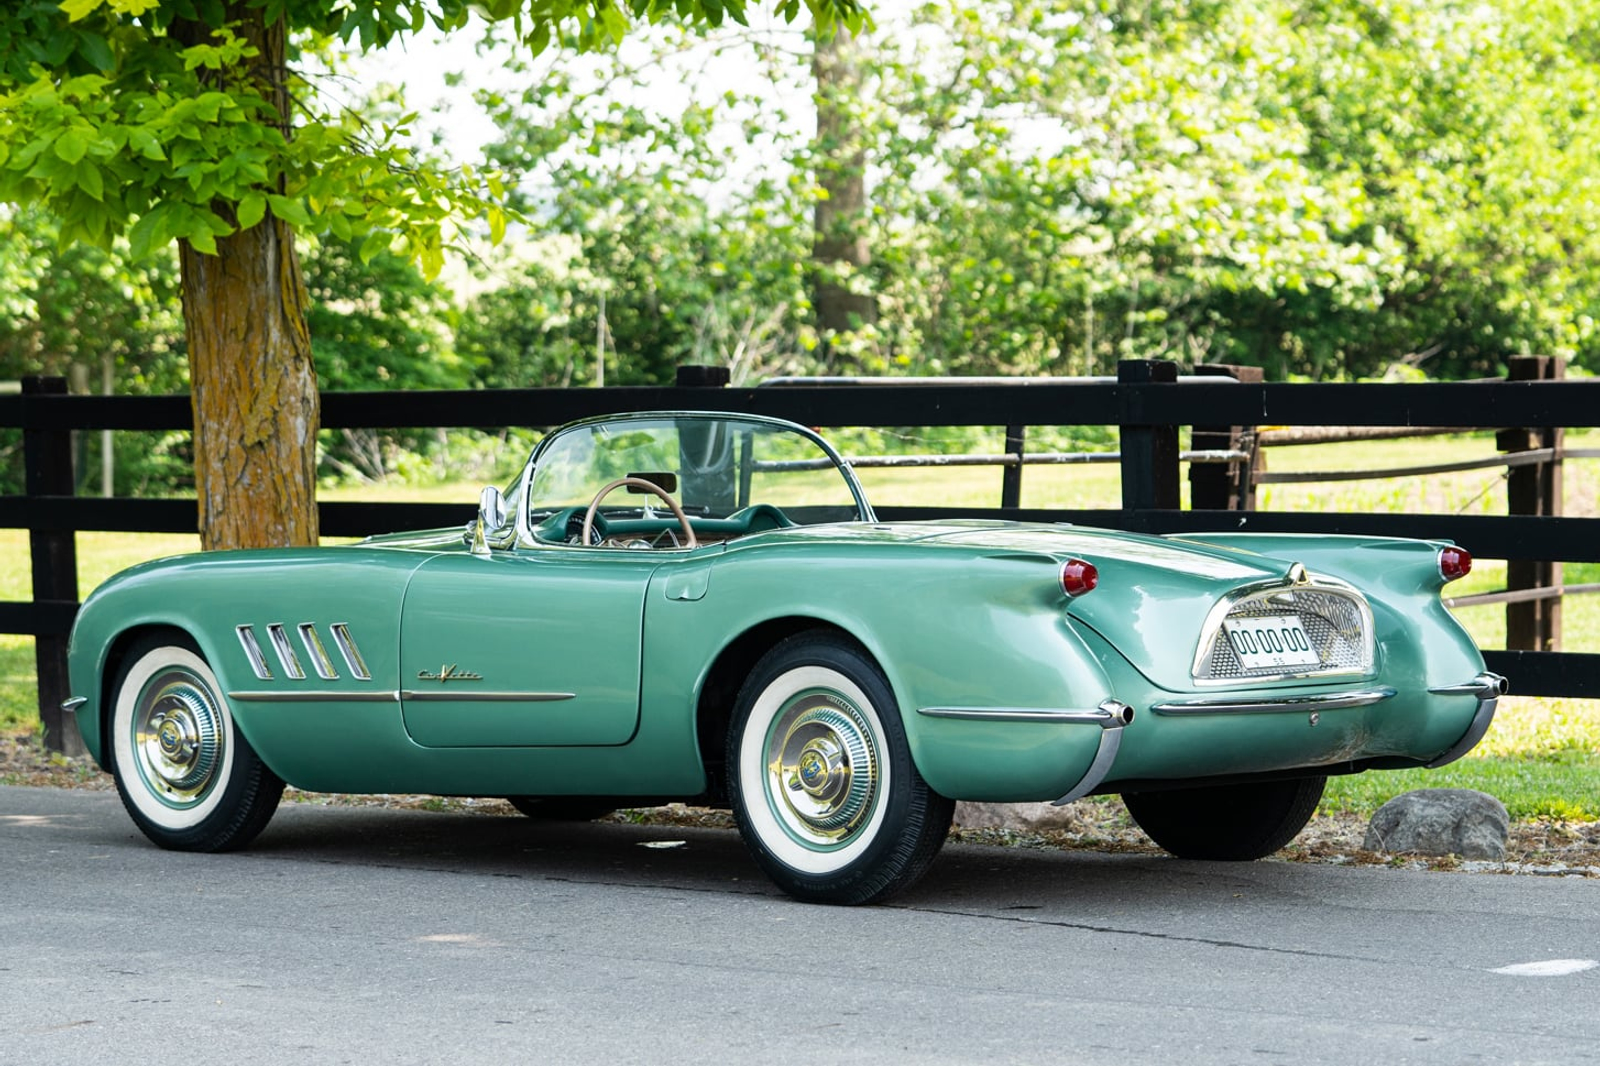 sports cars, for sale, concept, classic cars, 1954 chevrolet corvette so 2151 prototype shouldn't have survived